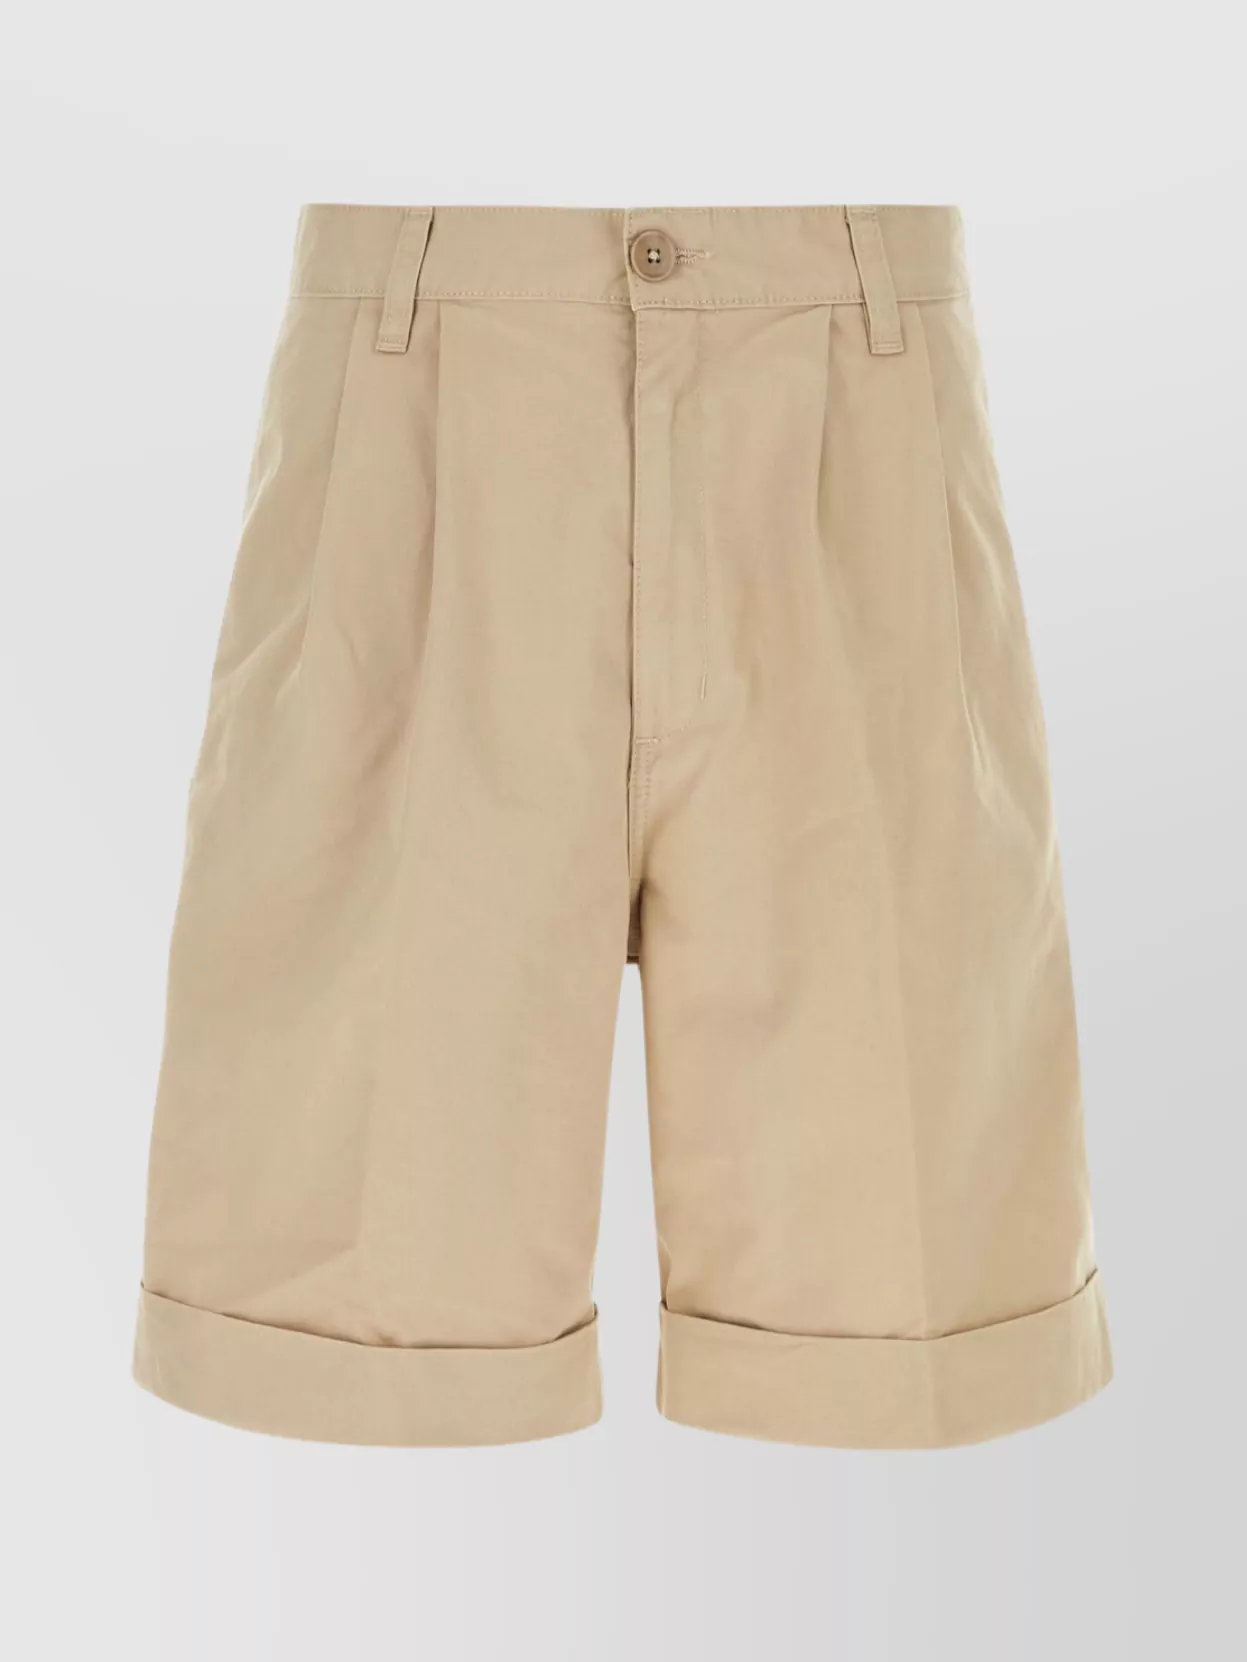 Carhartt Cotton Pleated Shorts Belt Loops In Neutral